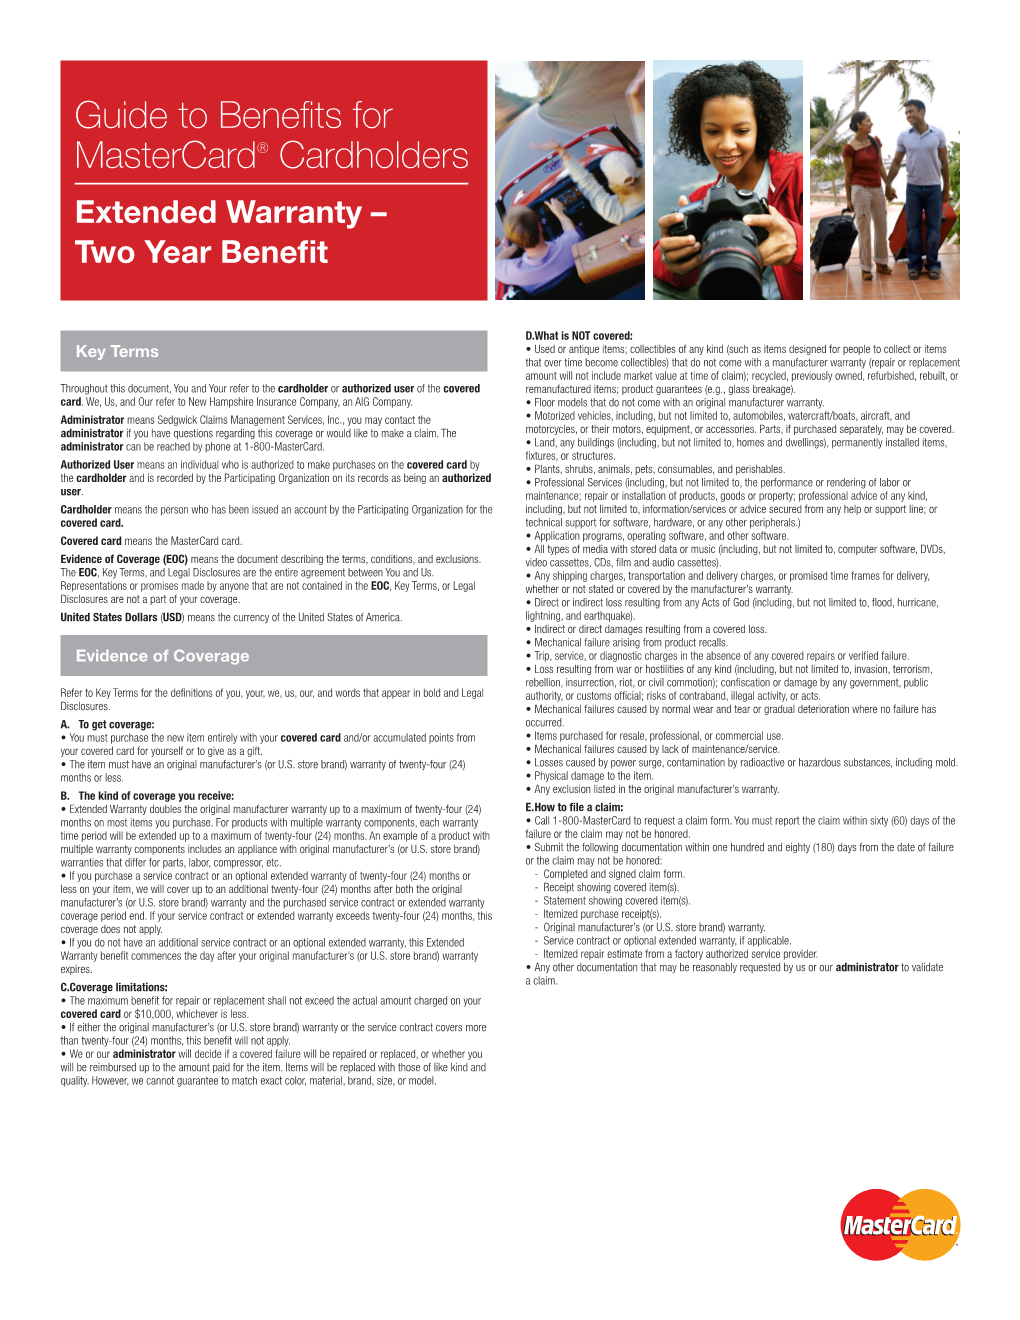 Extended Warranty – Two Year Benefit